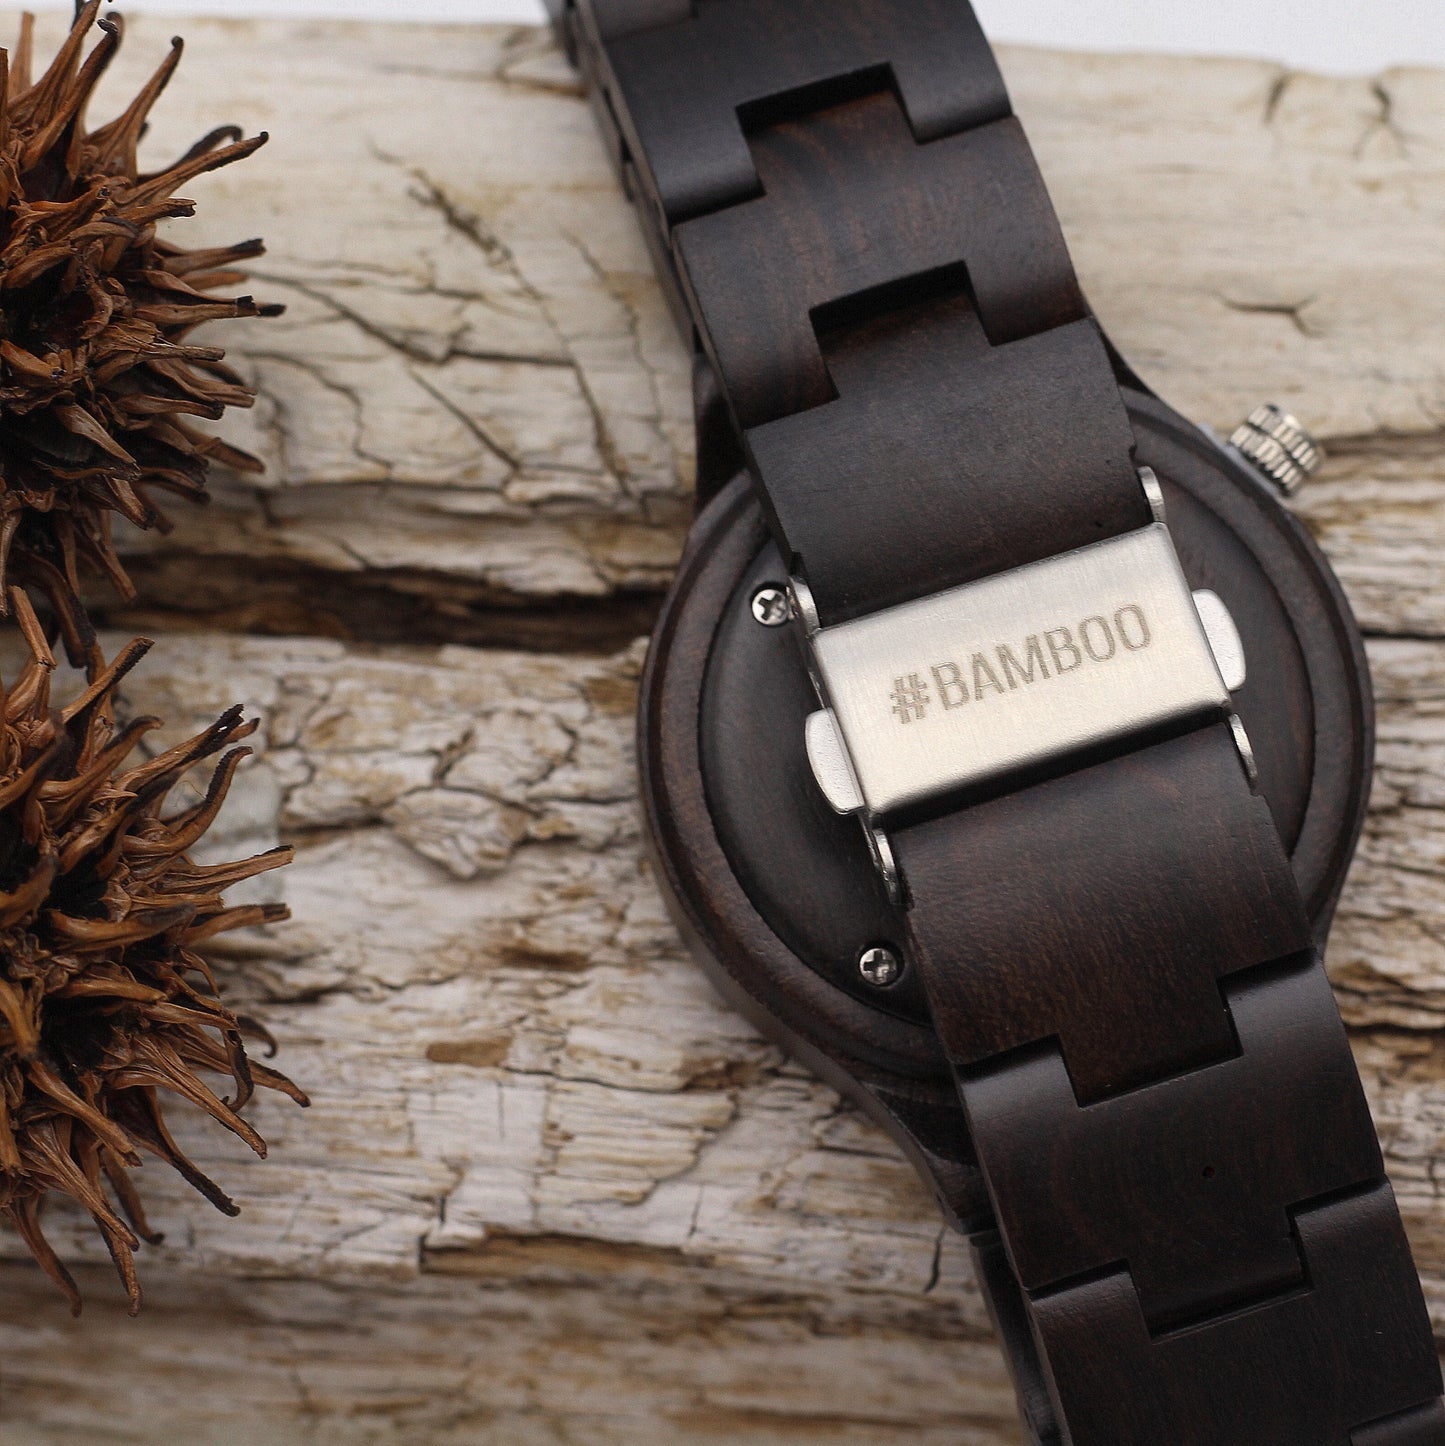 Eco Morticia - Ladies ebony watch. Wooden watches are the perfect gift for that special lady. Available from Hashtag Bamboo.